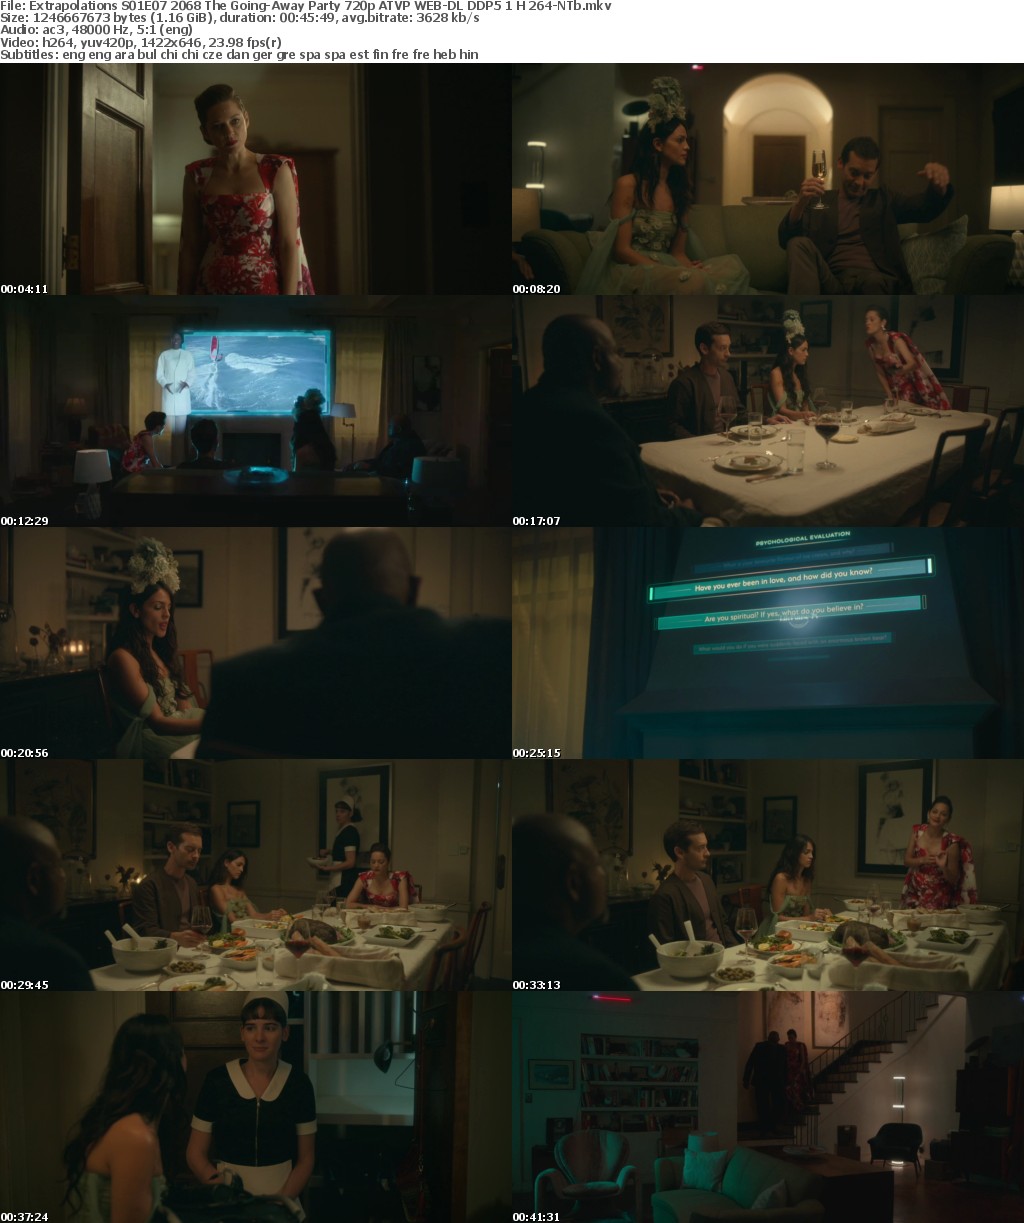 Extrapolations S01E07 2068 The Going-Away Party 720p ATVP WEB-DL DDP5 1 H 264-NTb